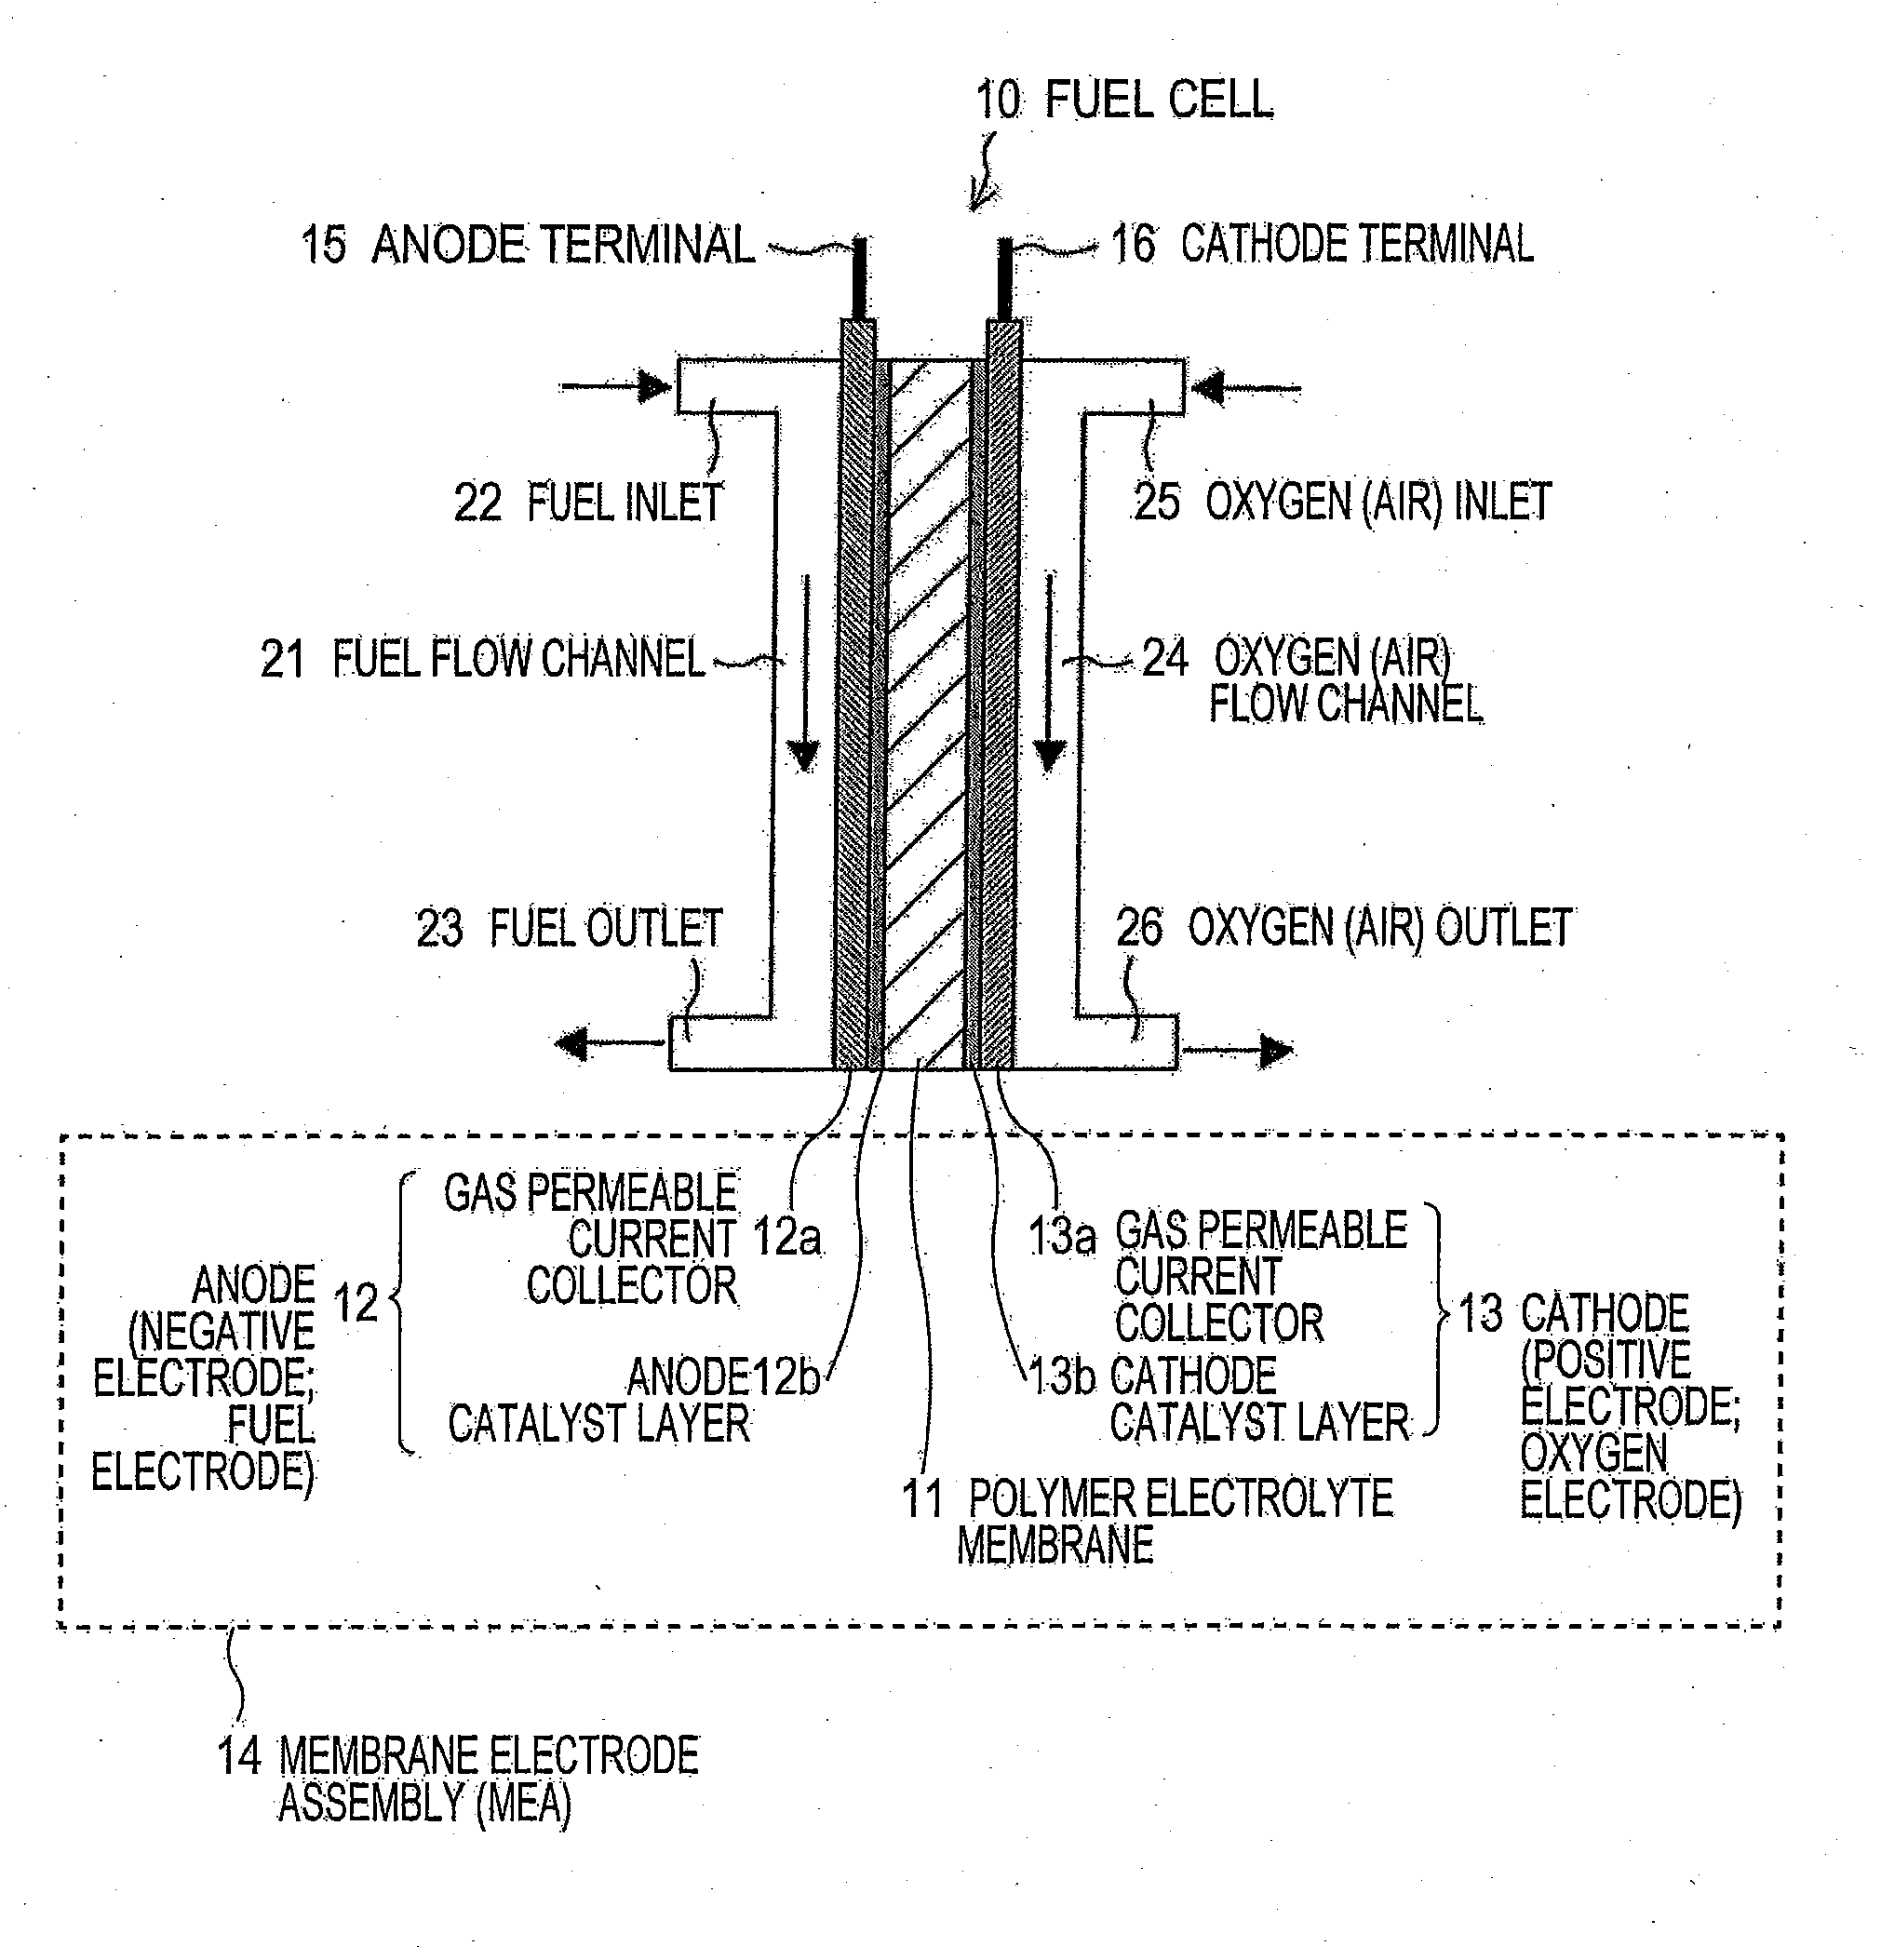 Ion-conductive composite, membrane electrode assembly (MEA), and electrochemical device